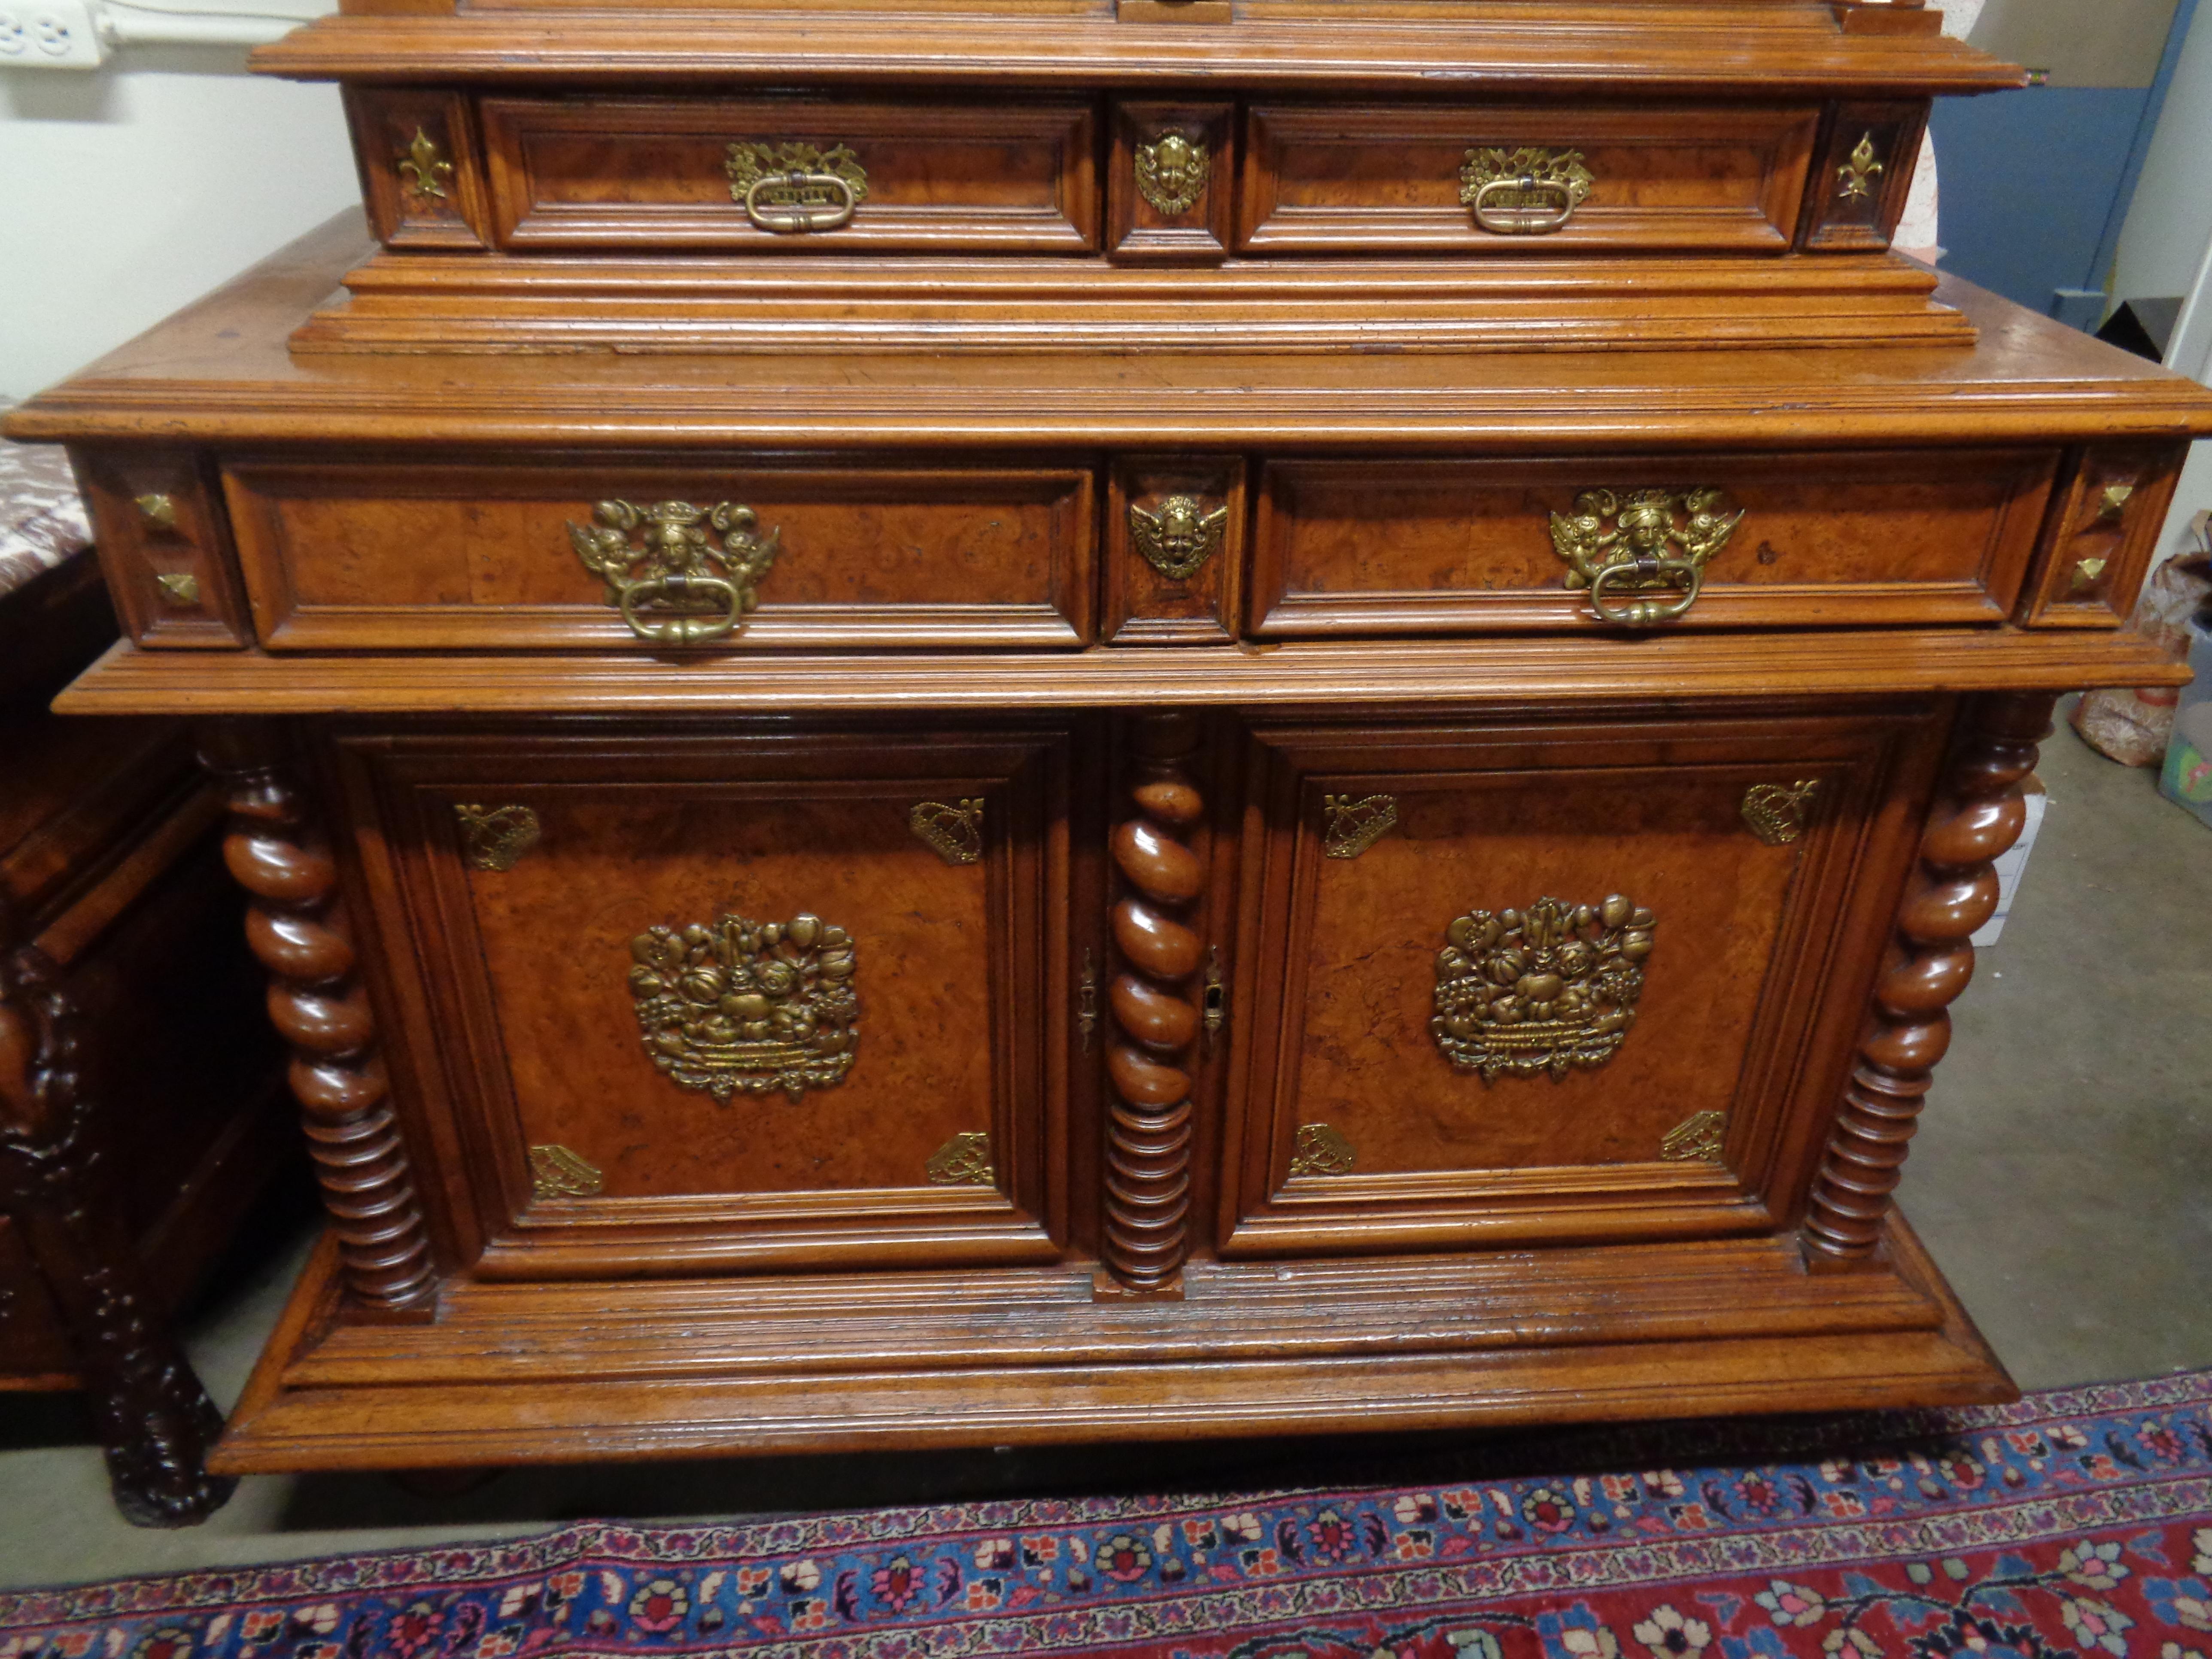 Late 17th Century French Louis XIV Buffet Deux Corps in Walnut and Burled Elm, circa 1670 For Sale